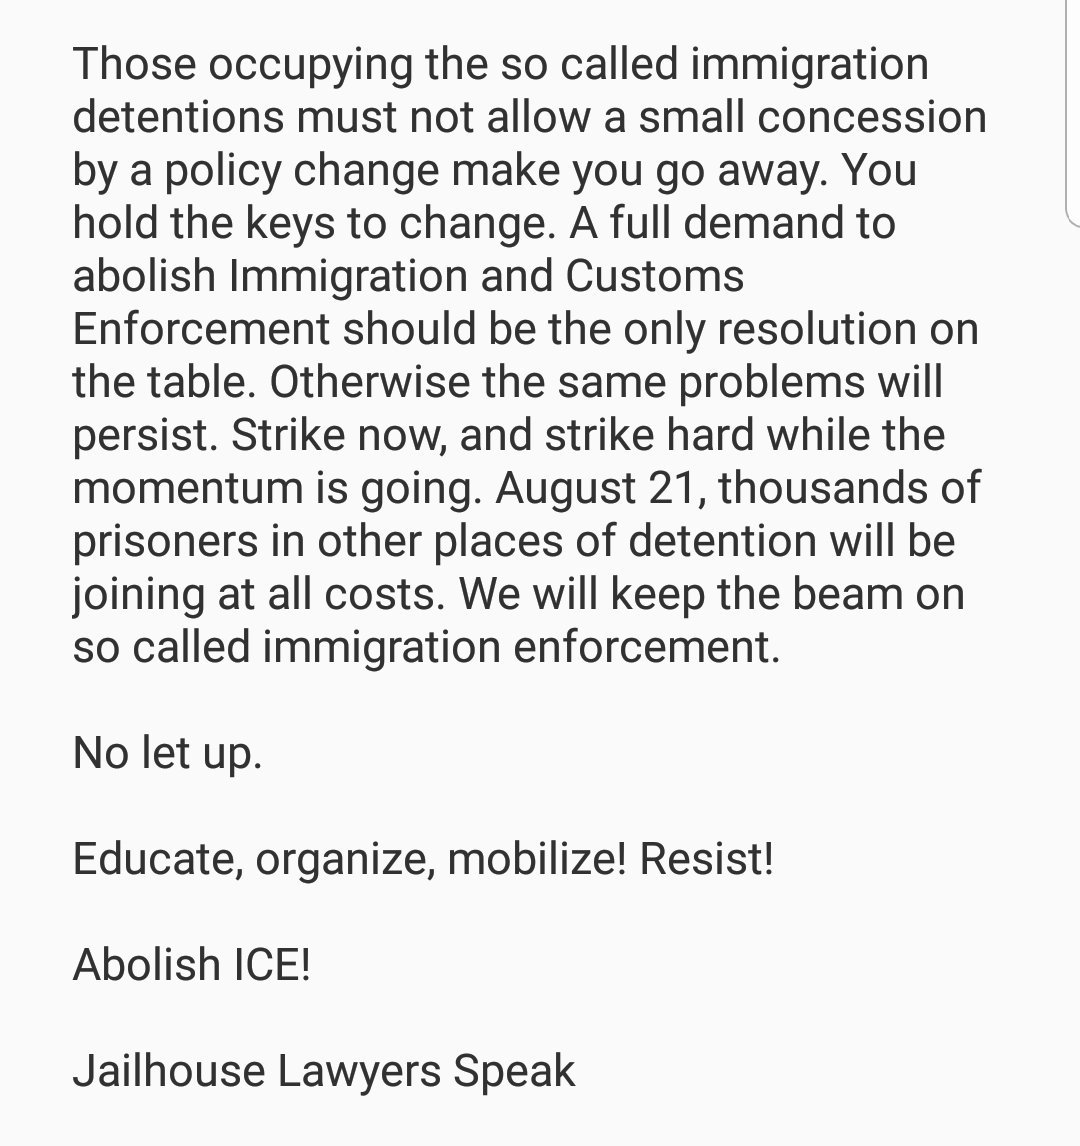 FOR IMMEDIATE RELEASE. STATEMENT FROM JLS ON BEHALF OF THE AUGUST 21 PRISON STRIKE CORE IN SOLIDARITY WITH THOSE RESISTING ICE AND THOSE DETAINED BY ICE